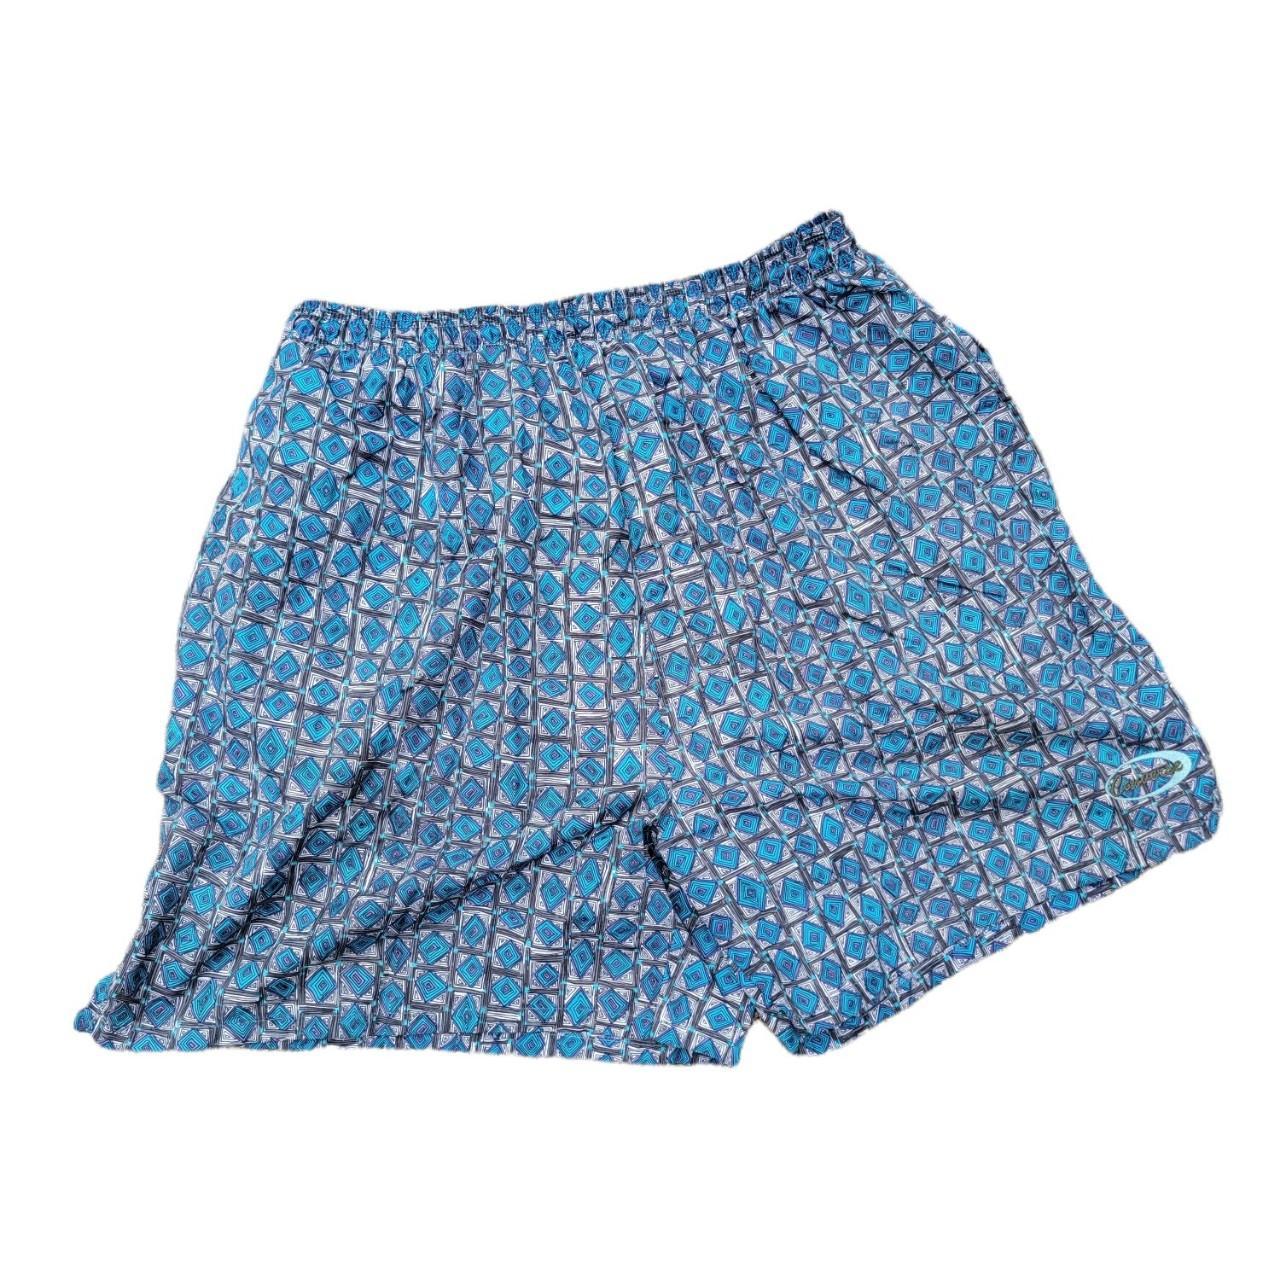 Converse Men's Blue and White Shorts